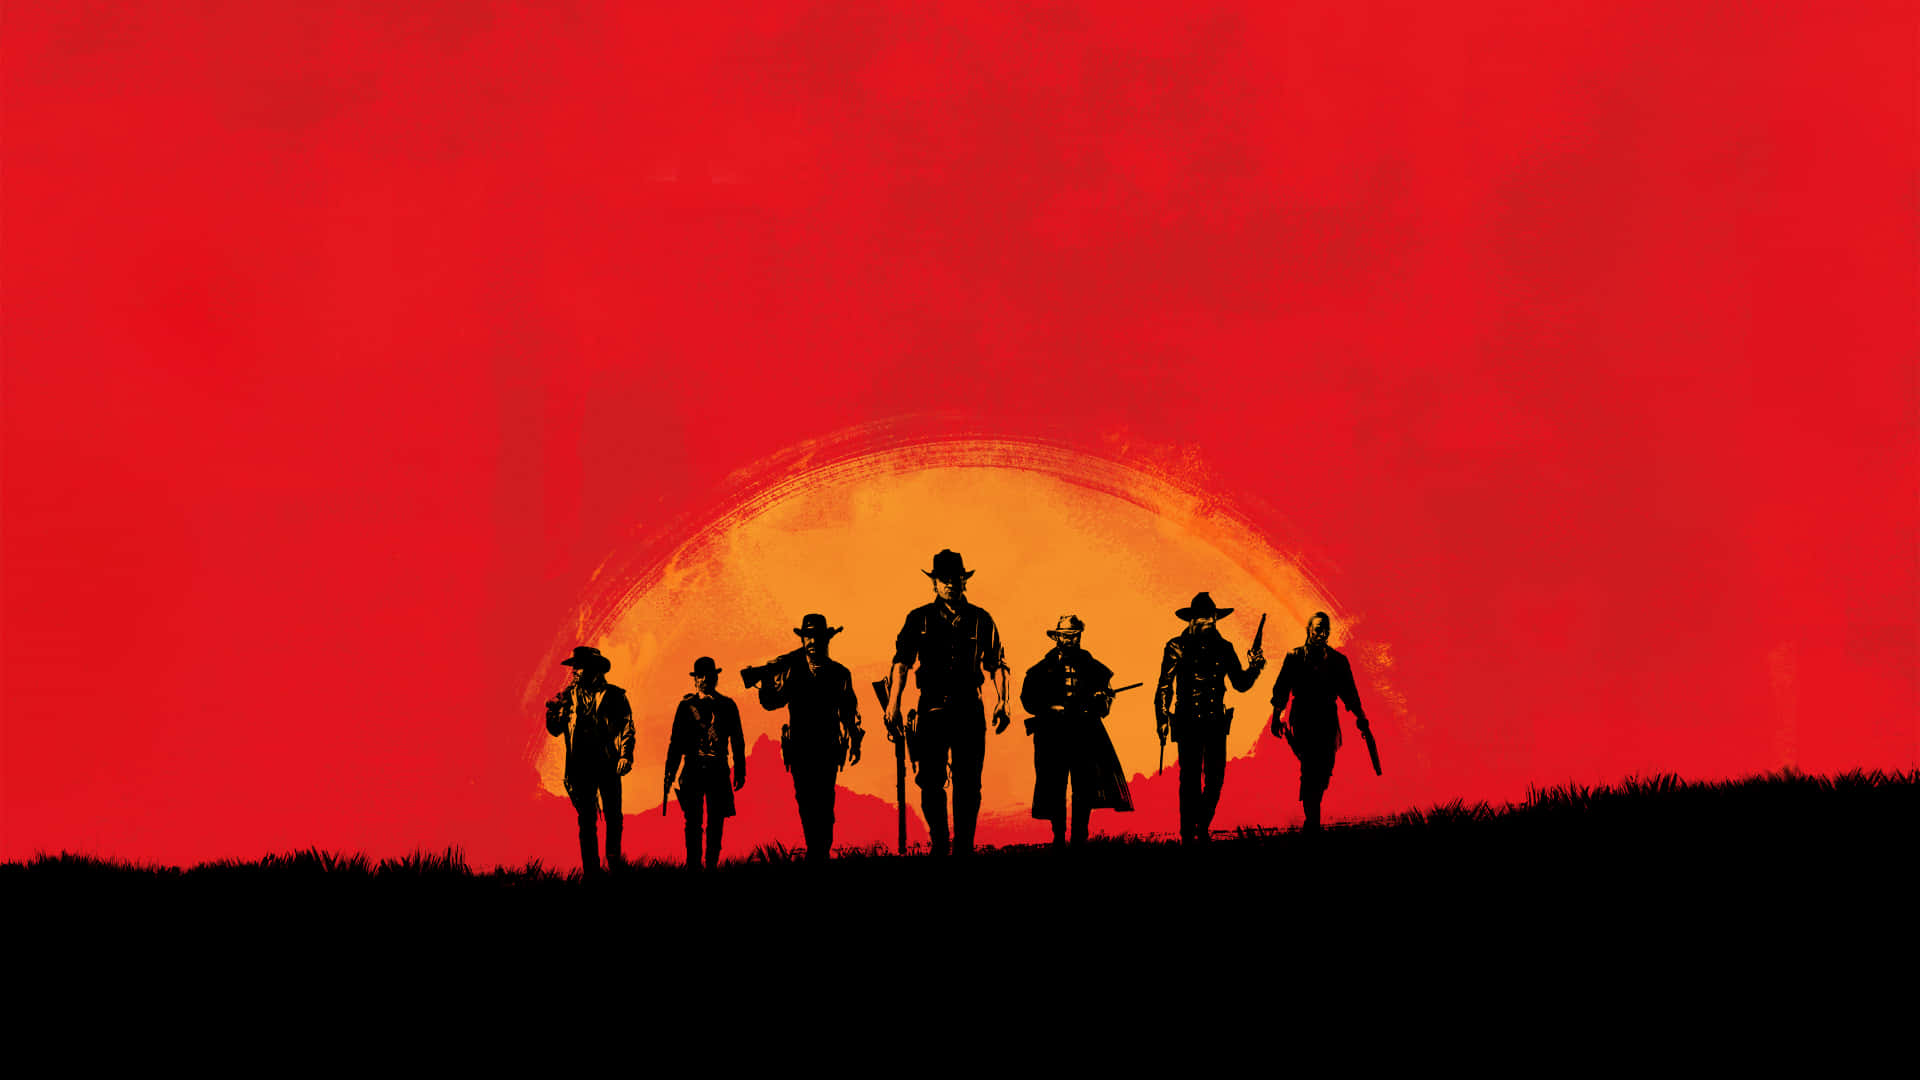 Best Red Dead Redemption 2 Cowboys With A Sunset Backdrop Background